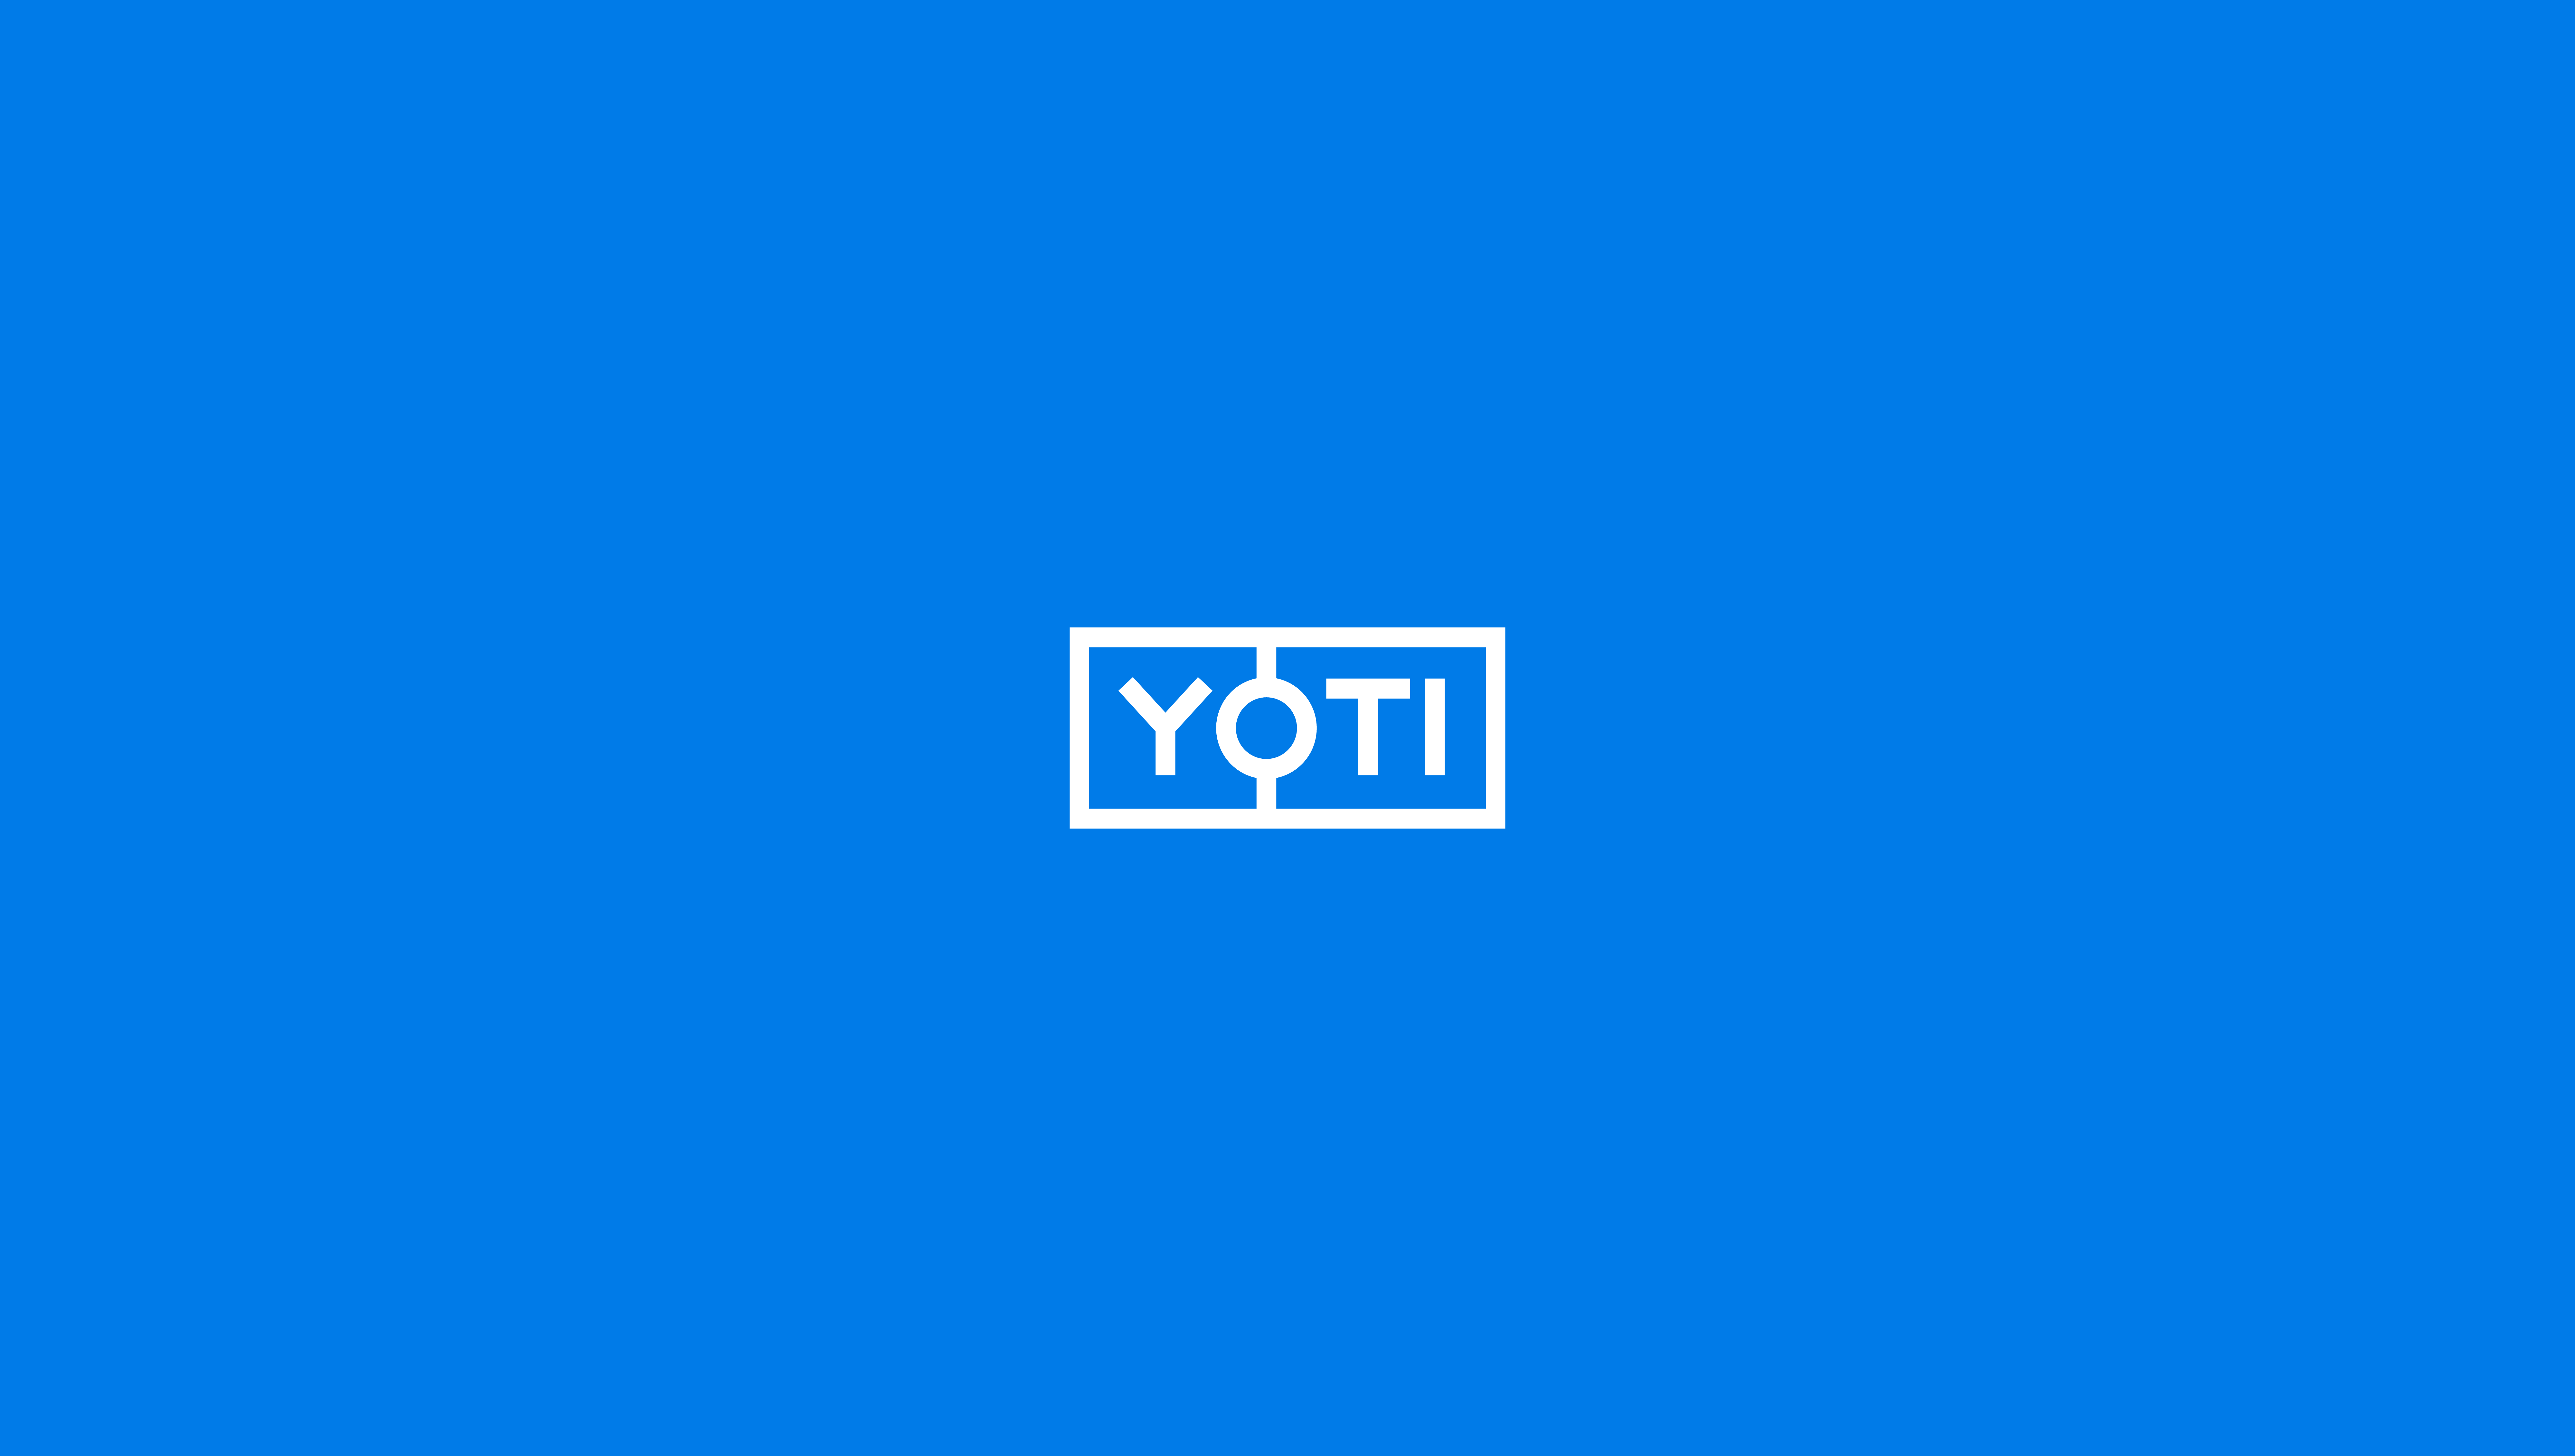 Facebook Dating introduces age verification with Yoti to create age appropriate experiences